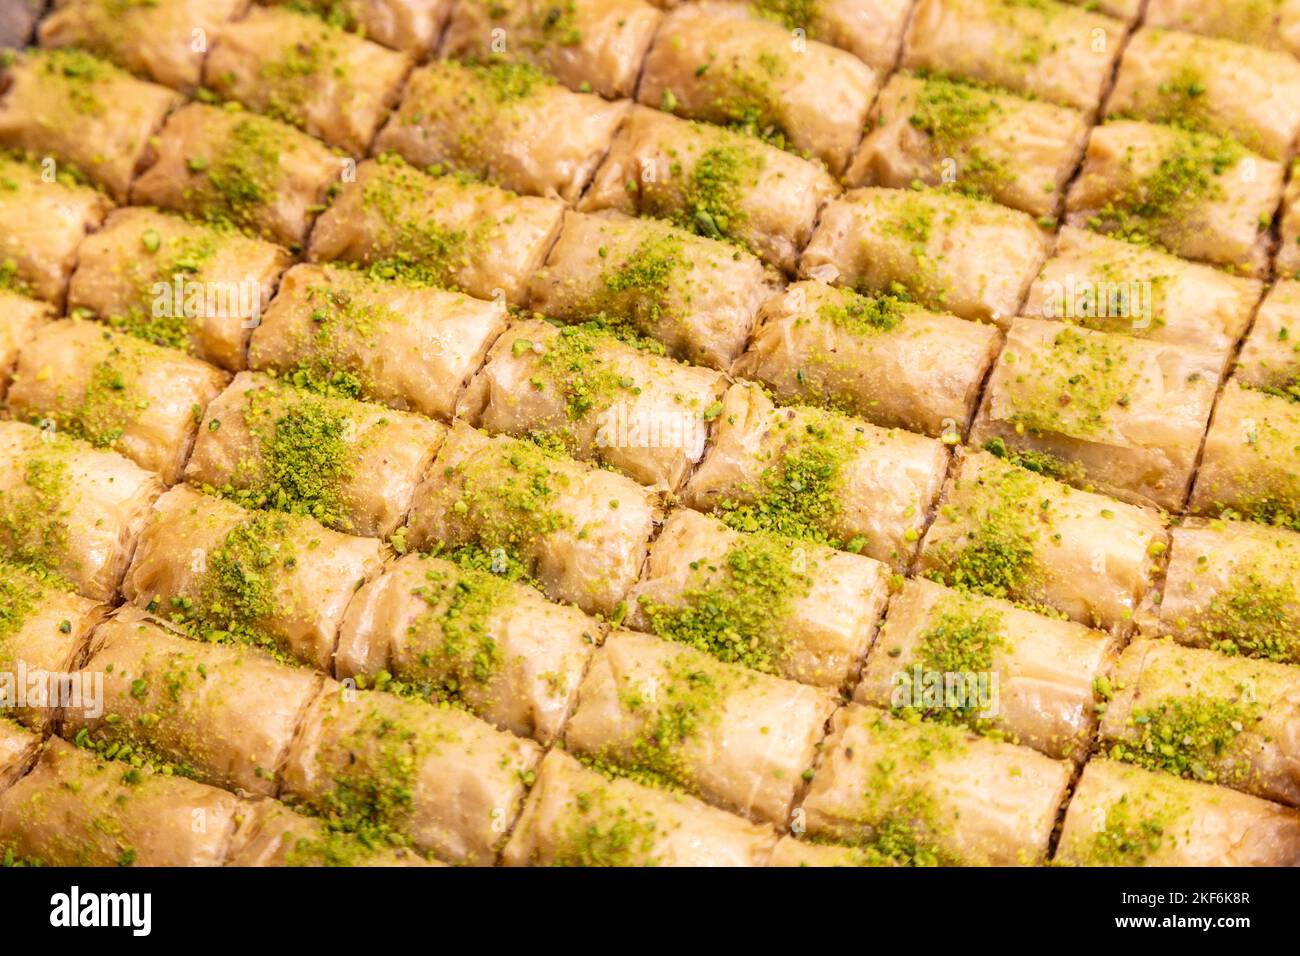 Tray of Middle Eastern pistachio baklava pastries Stock Photo